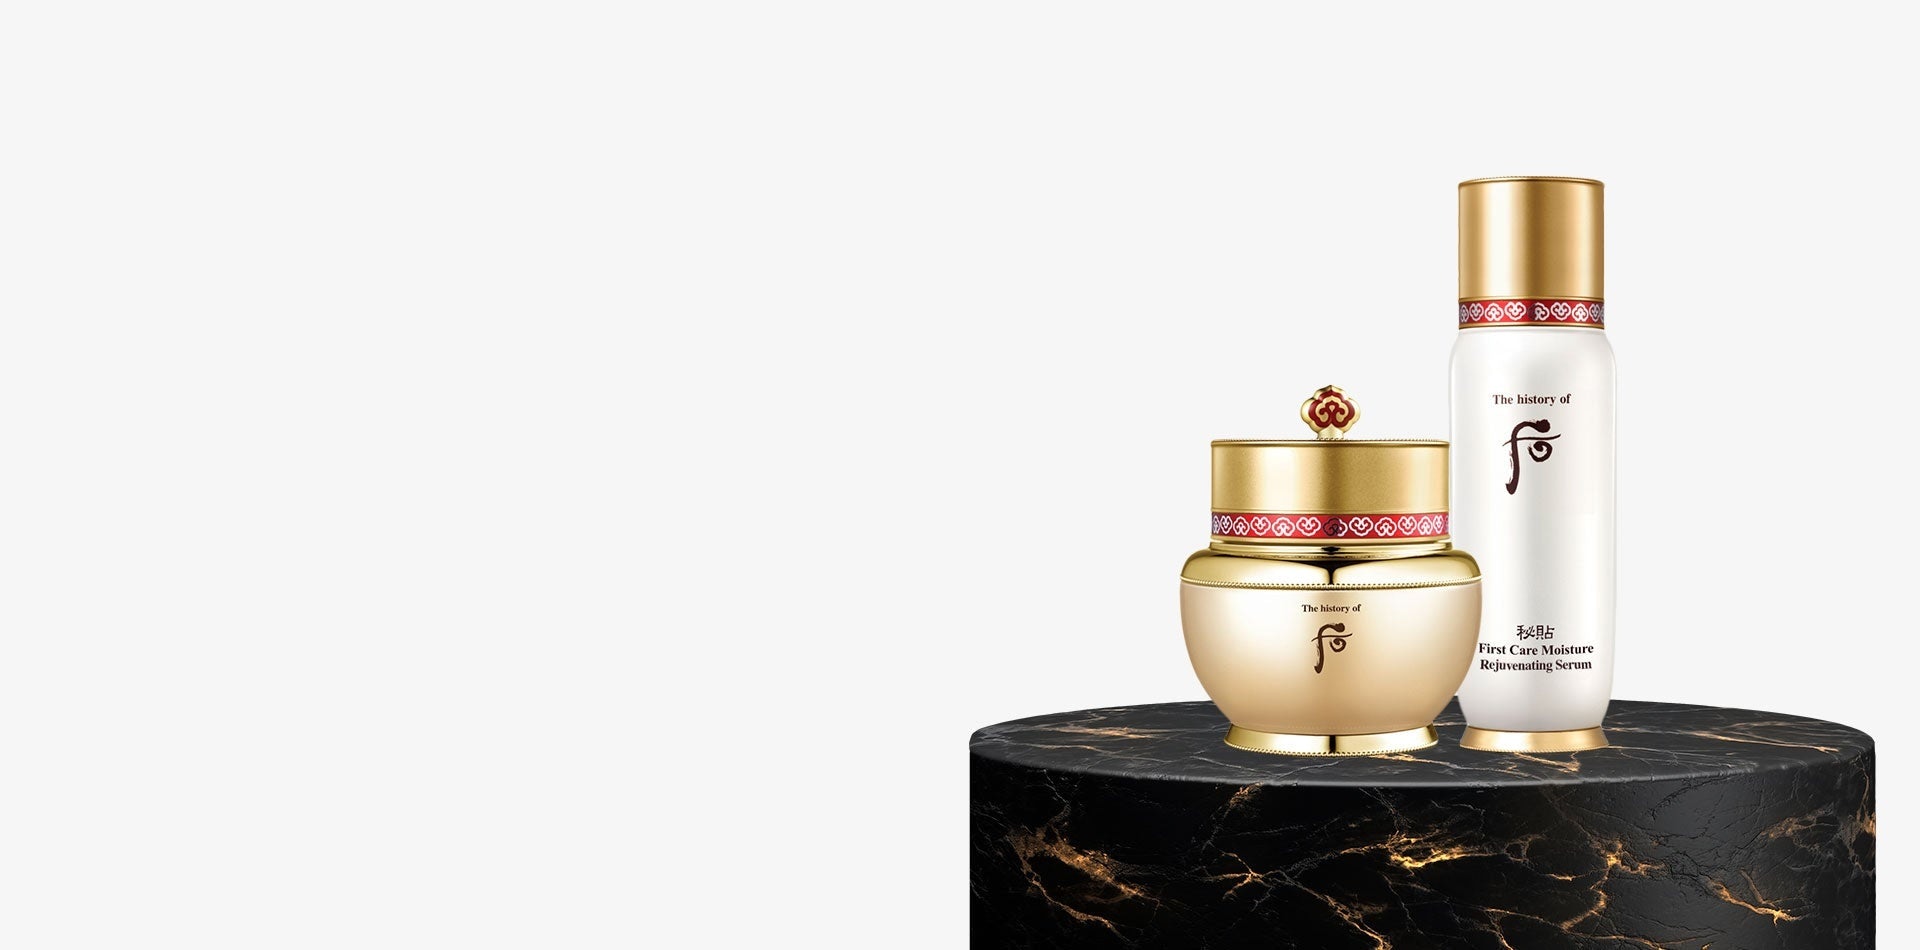 Higher-end K-Beauty brand The History of Whoo has found success through e-commerce livestreaming efforts in China. Image: LG Lifestyle